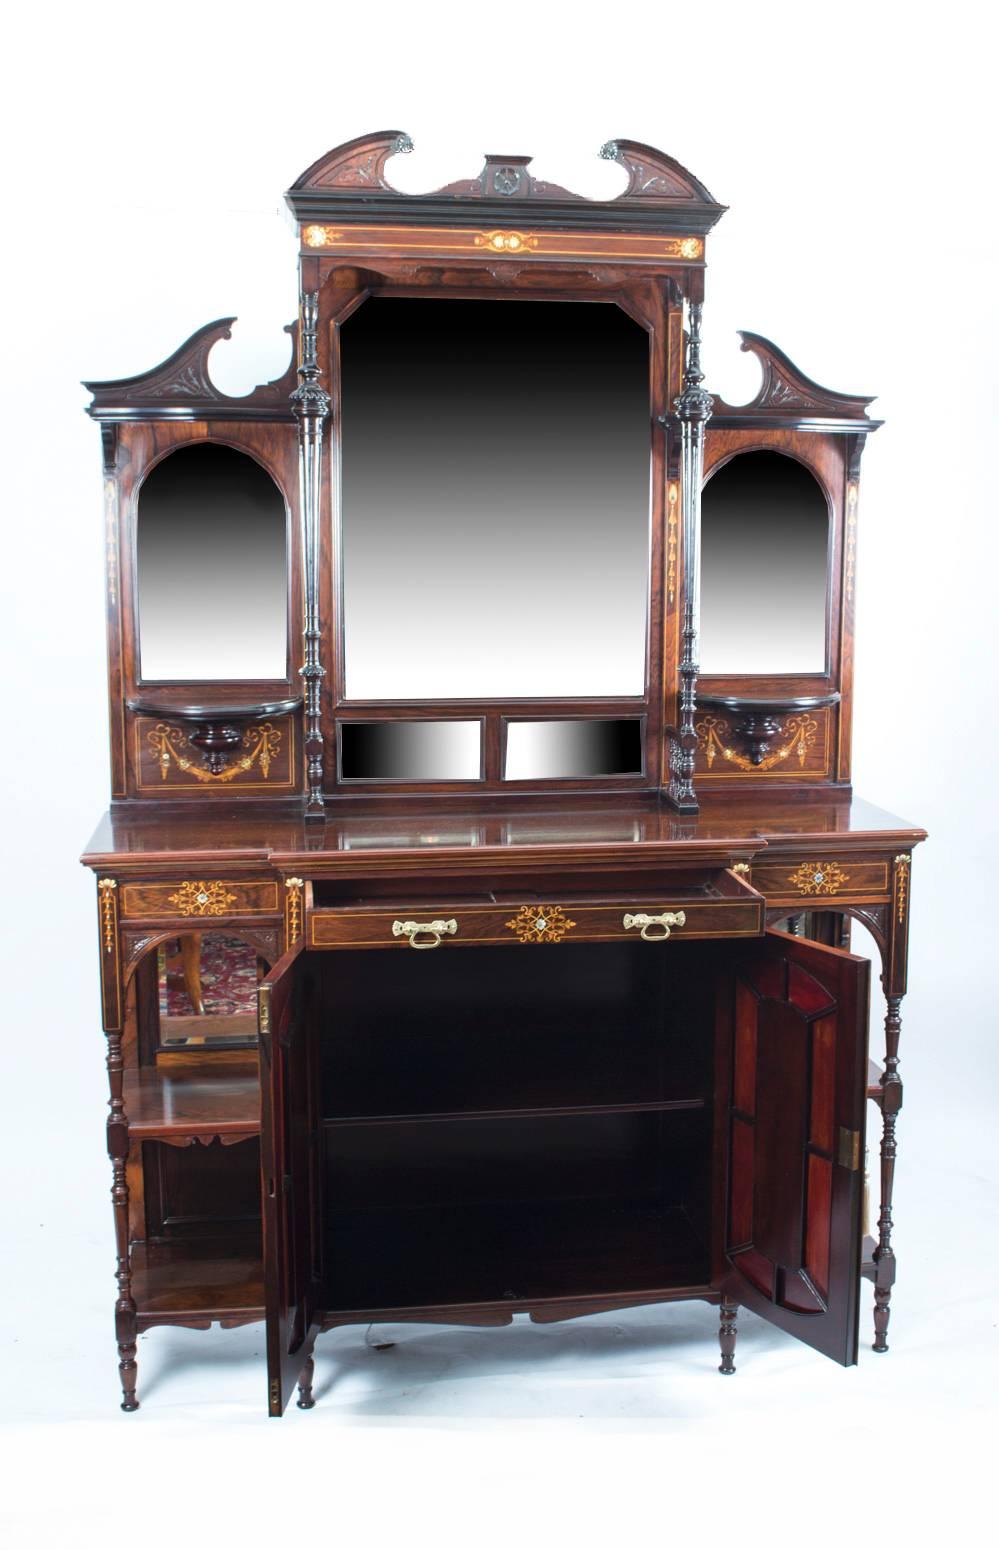 This is a stunning antique English Edwardian inlaid rosewood breakfront side cabinet with mirrored back and door panels and raised on slender turned supports, circa 1890 in date.

This cabinet is of the very highest quality with exquisite hand-cut